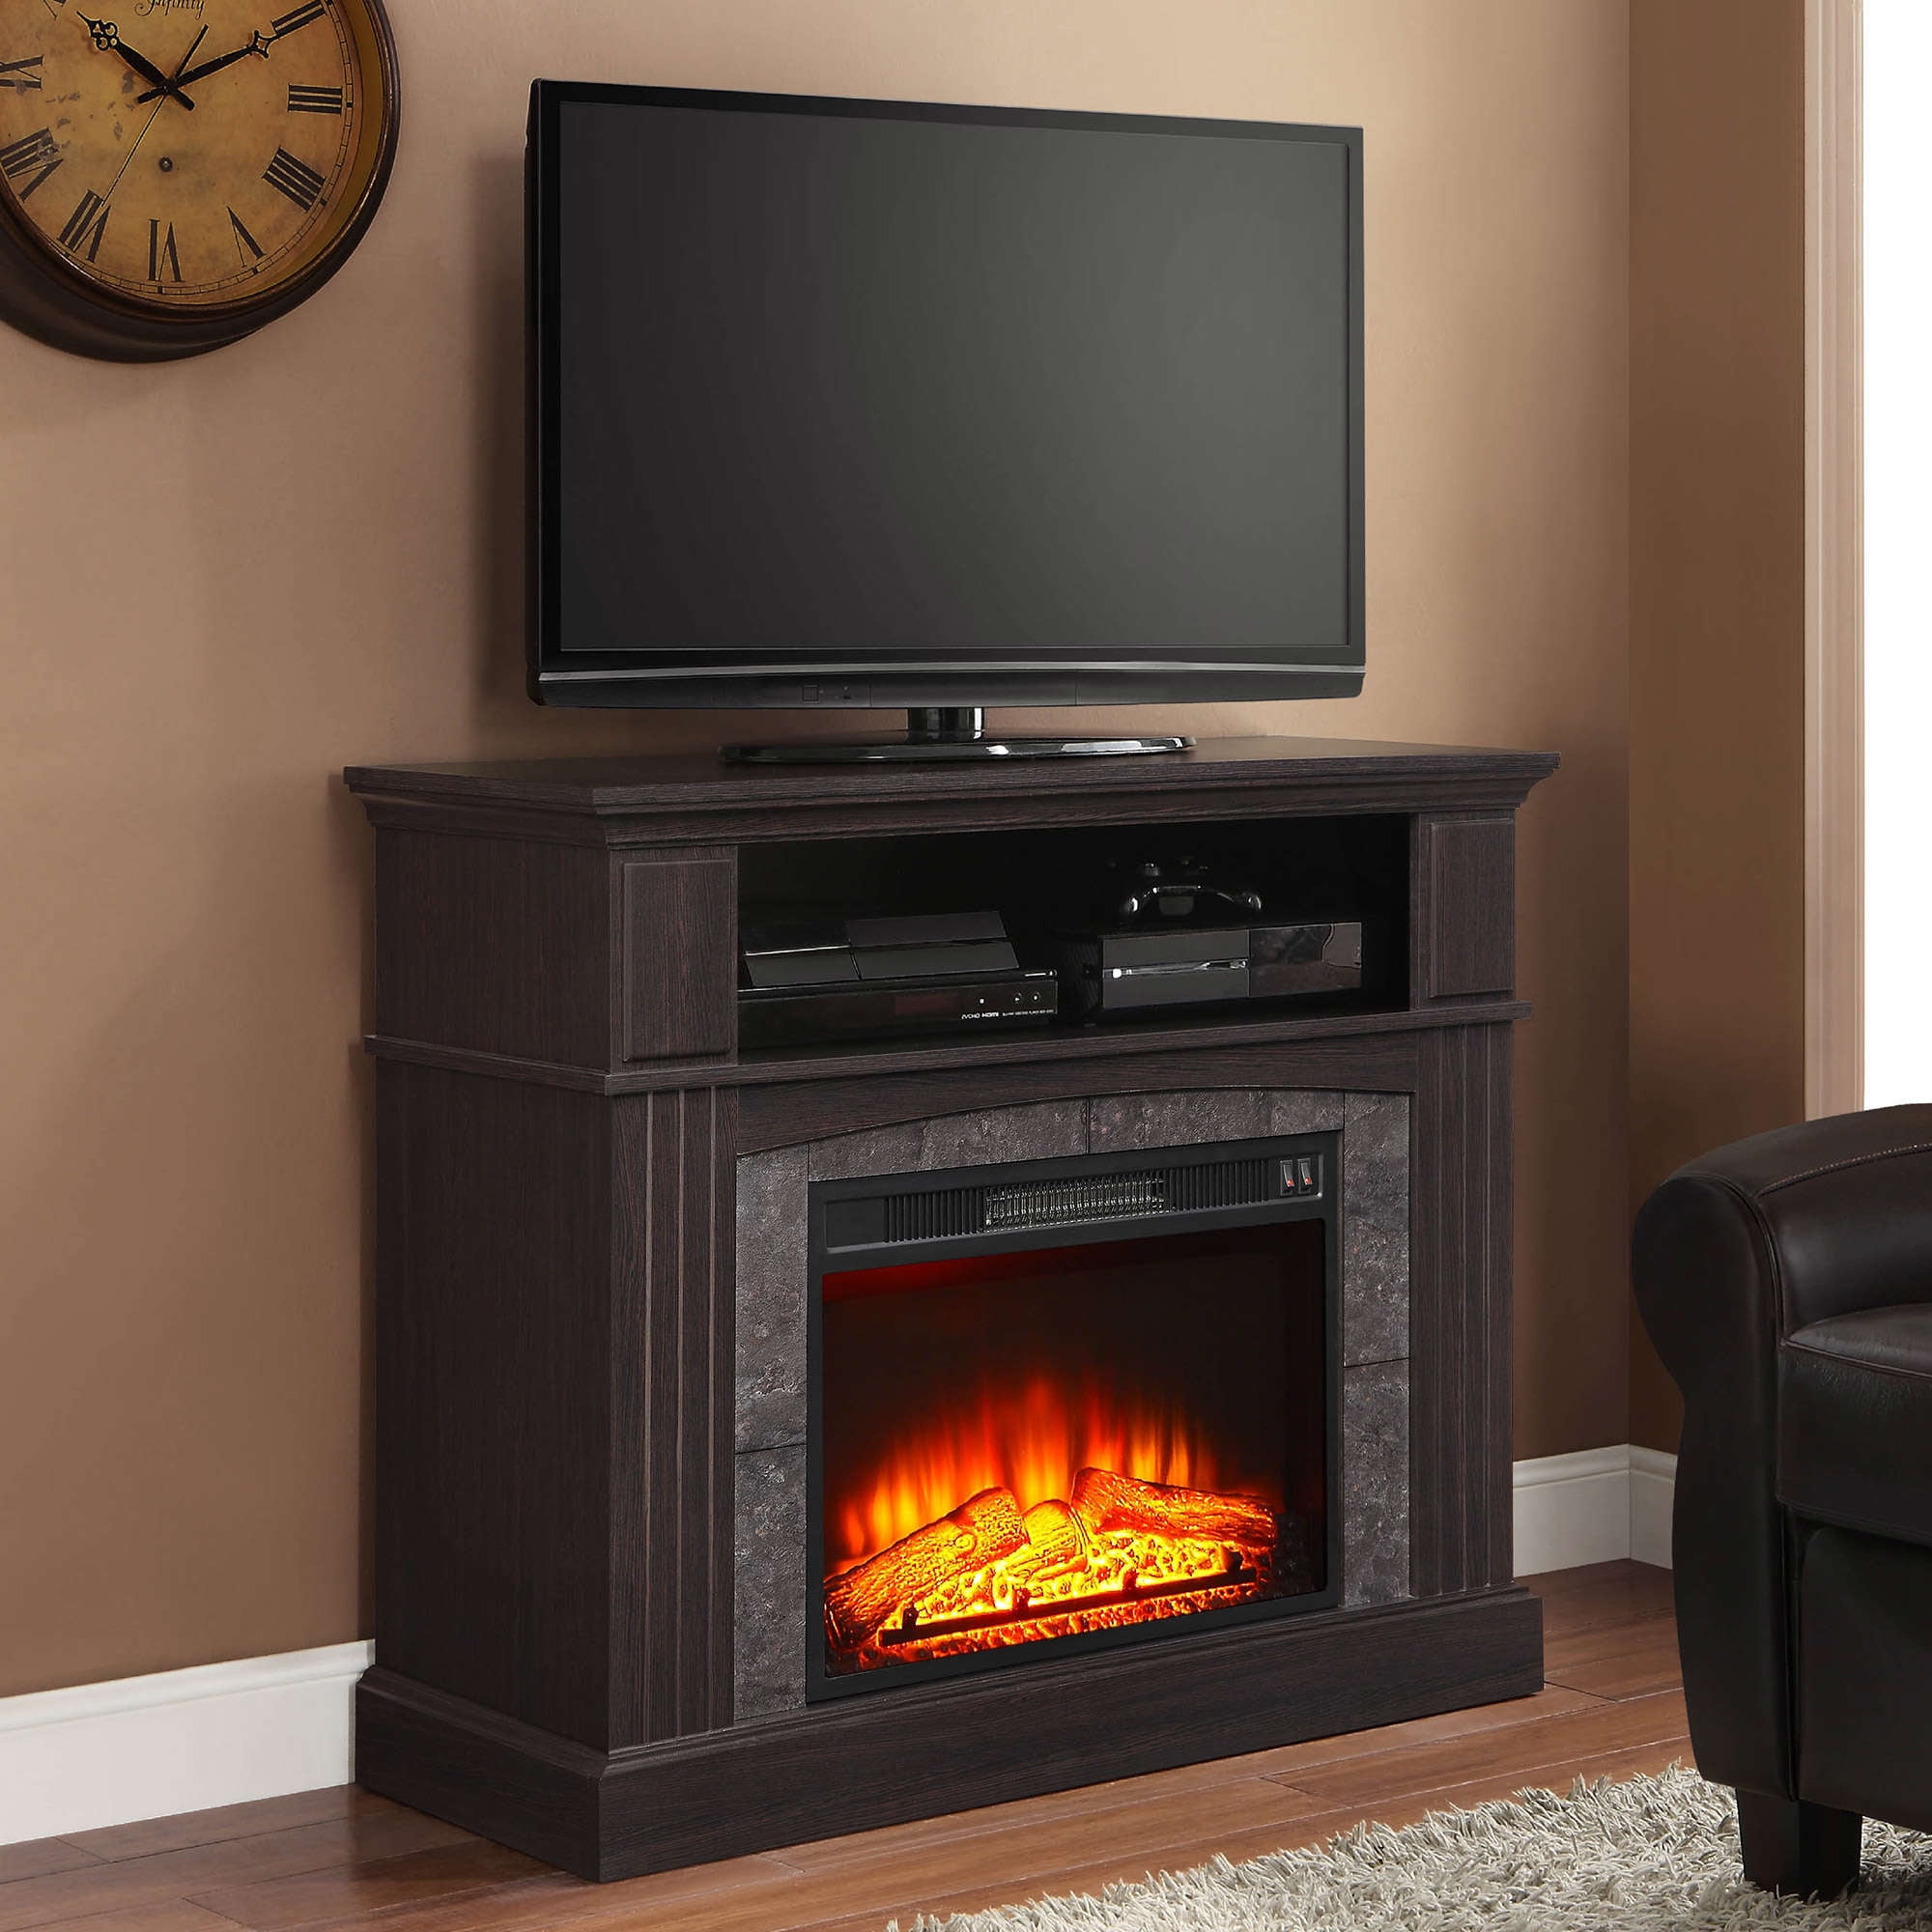 Media Fireplace TV Stand Electric With Storage For 50 Inch ...